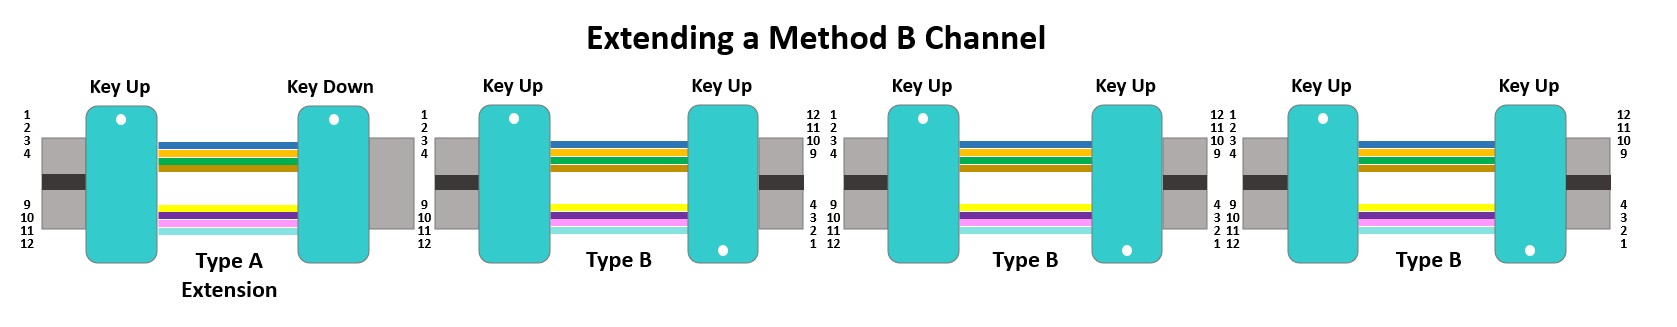 Extending a Method B channel with an MPO Type A cable